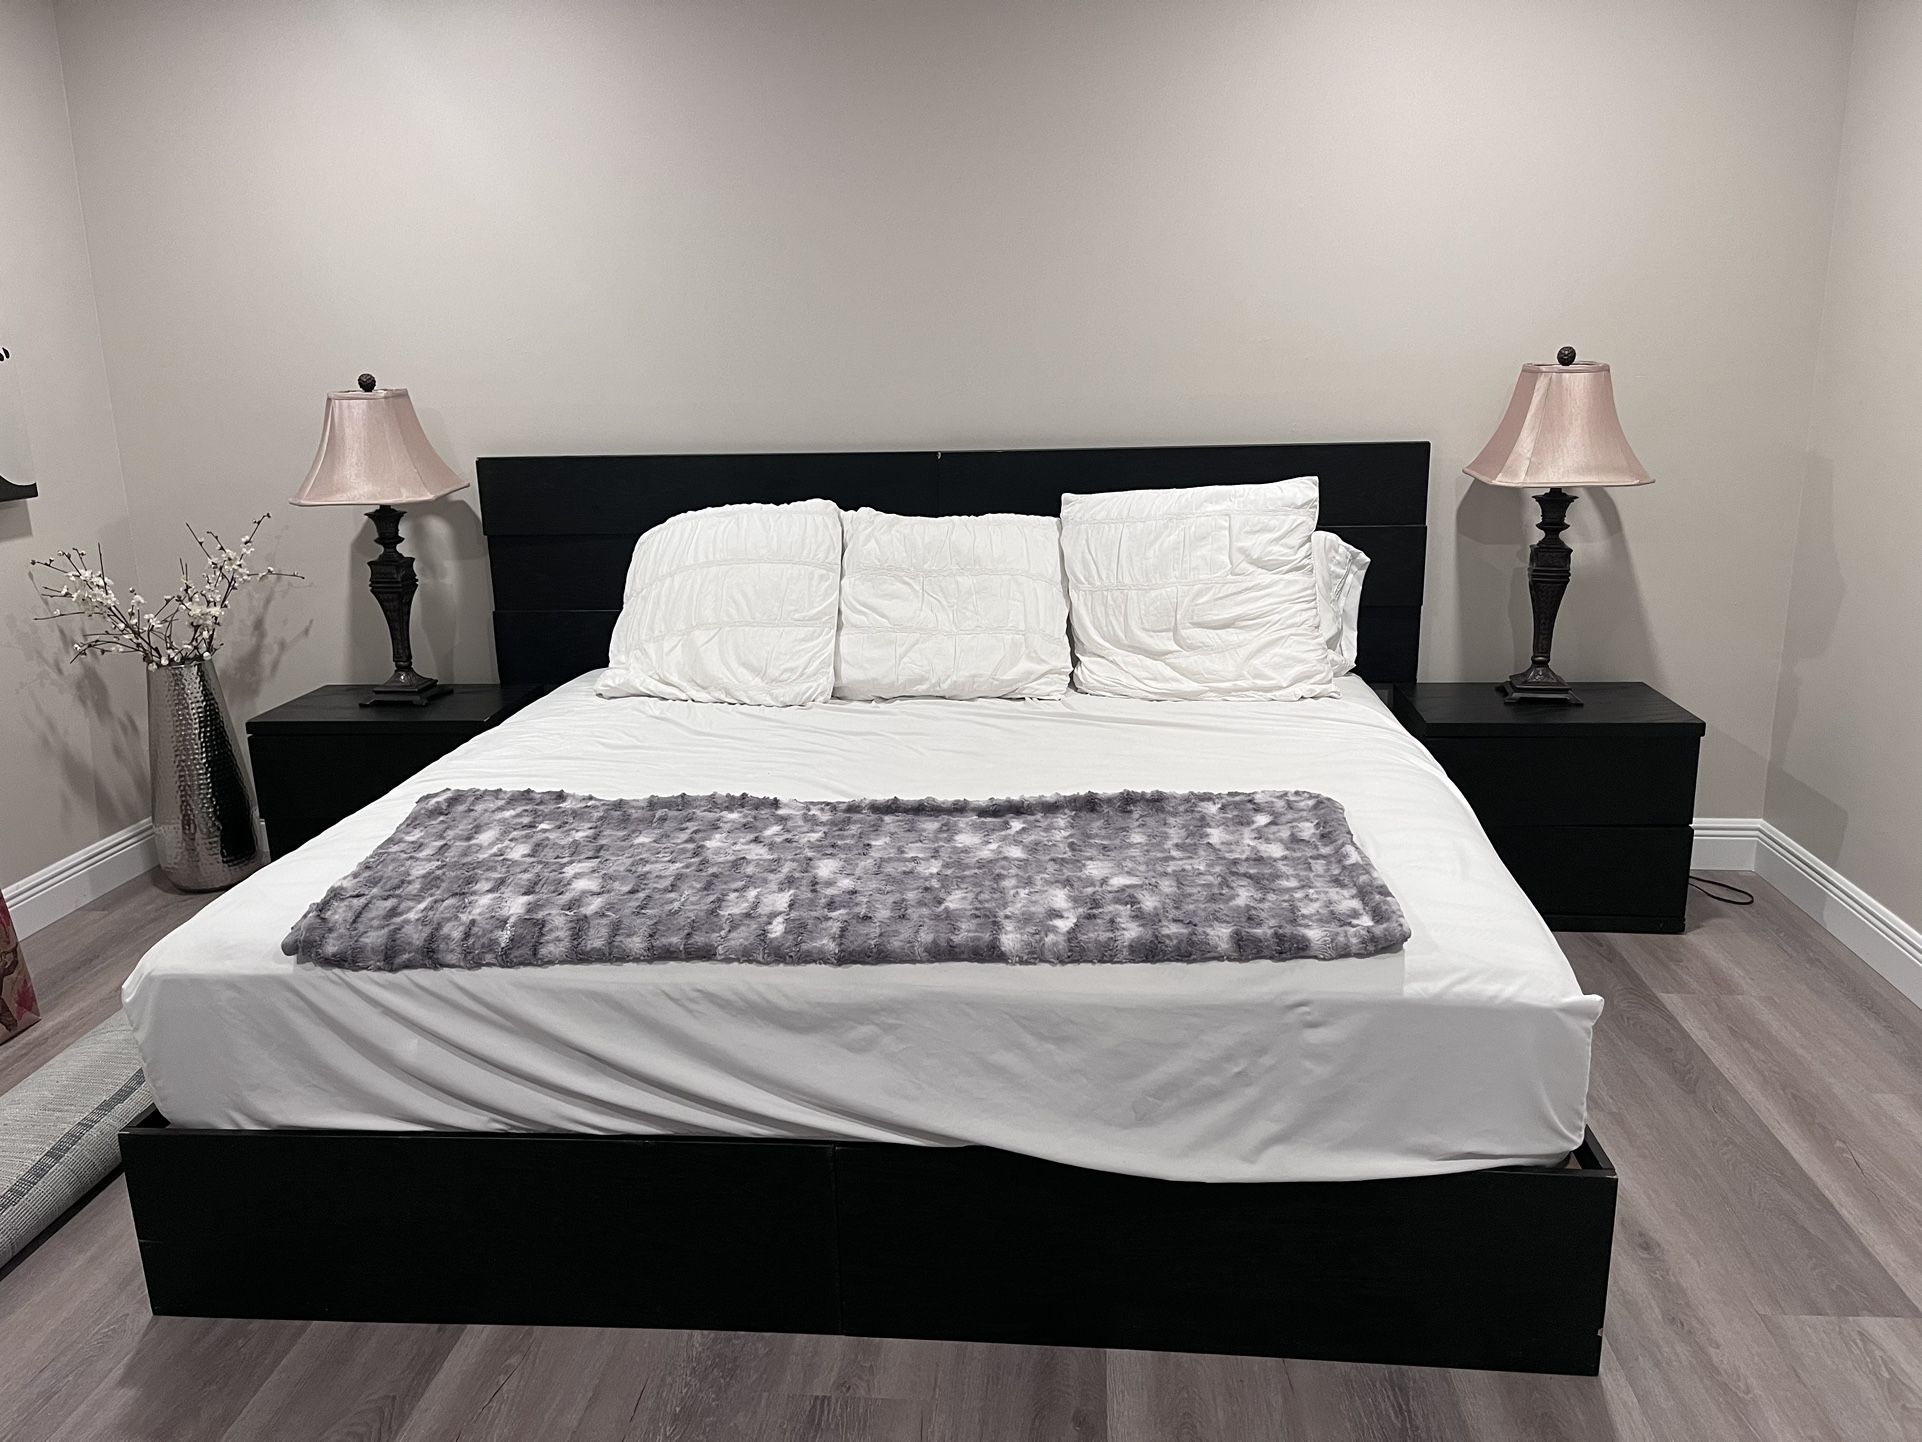 KING Size Wooden Bed Frame And mattress 